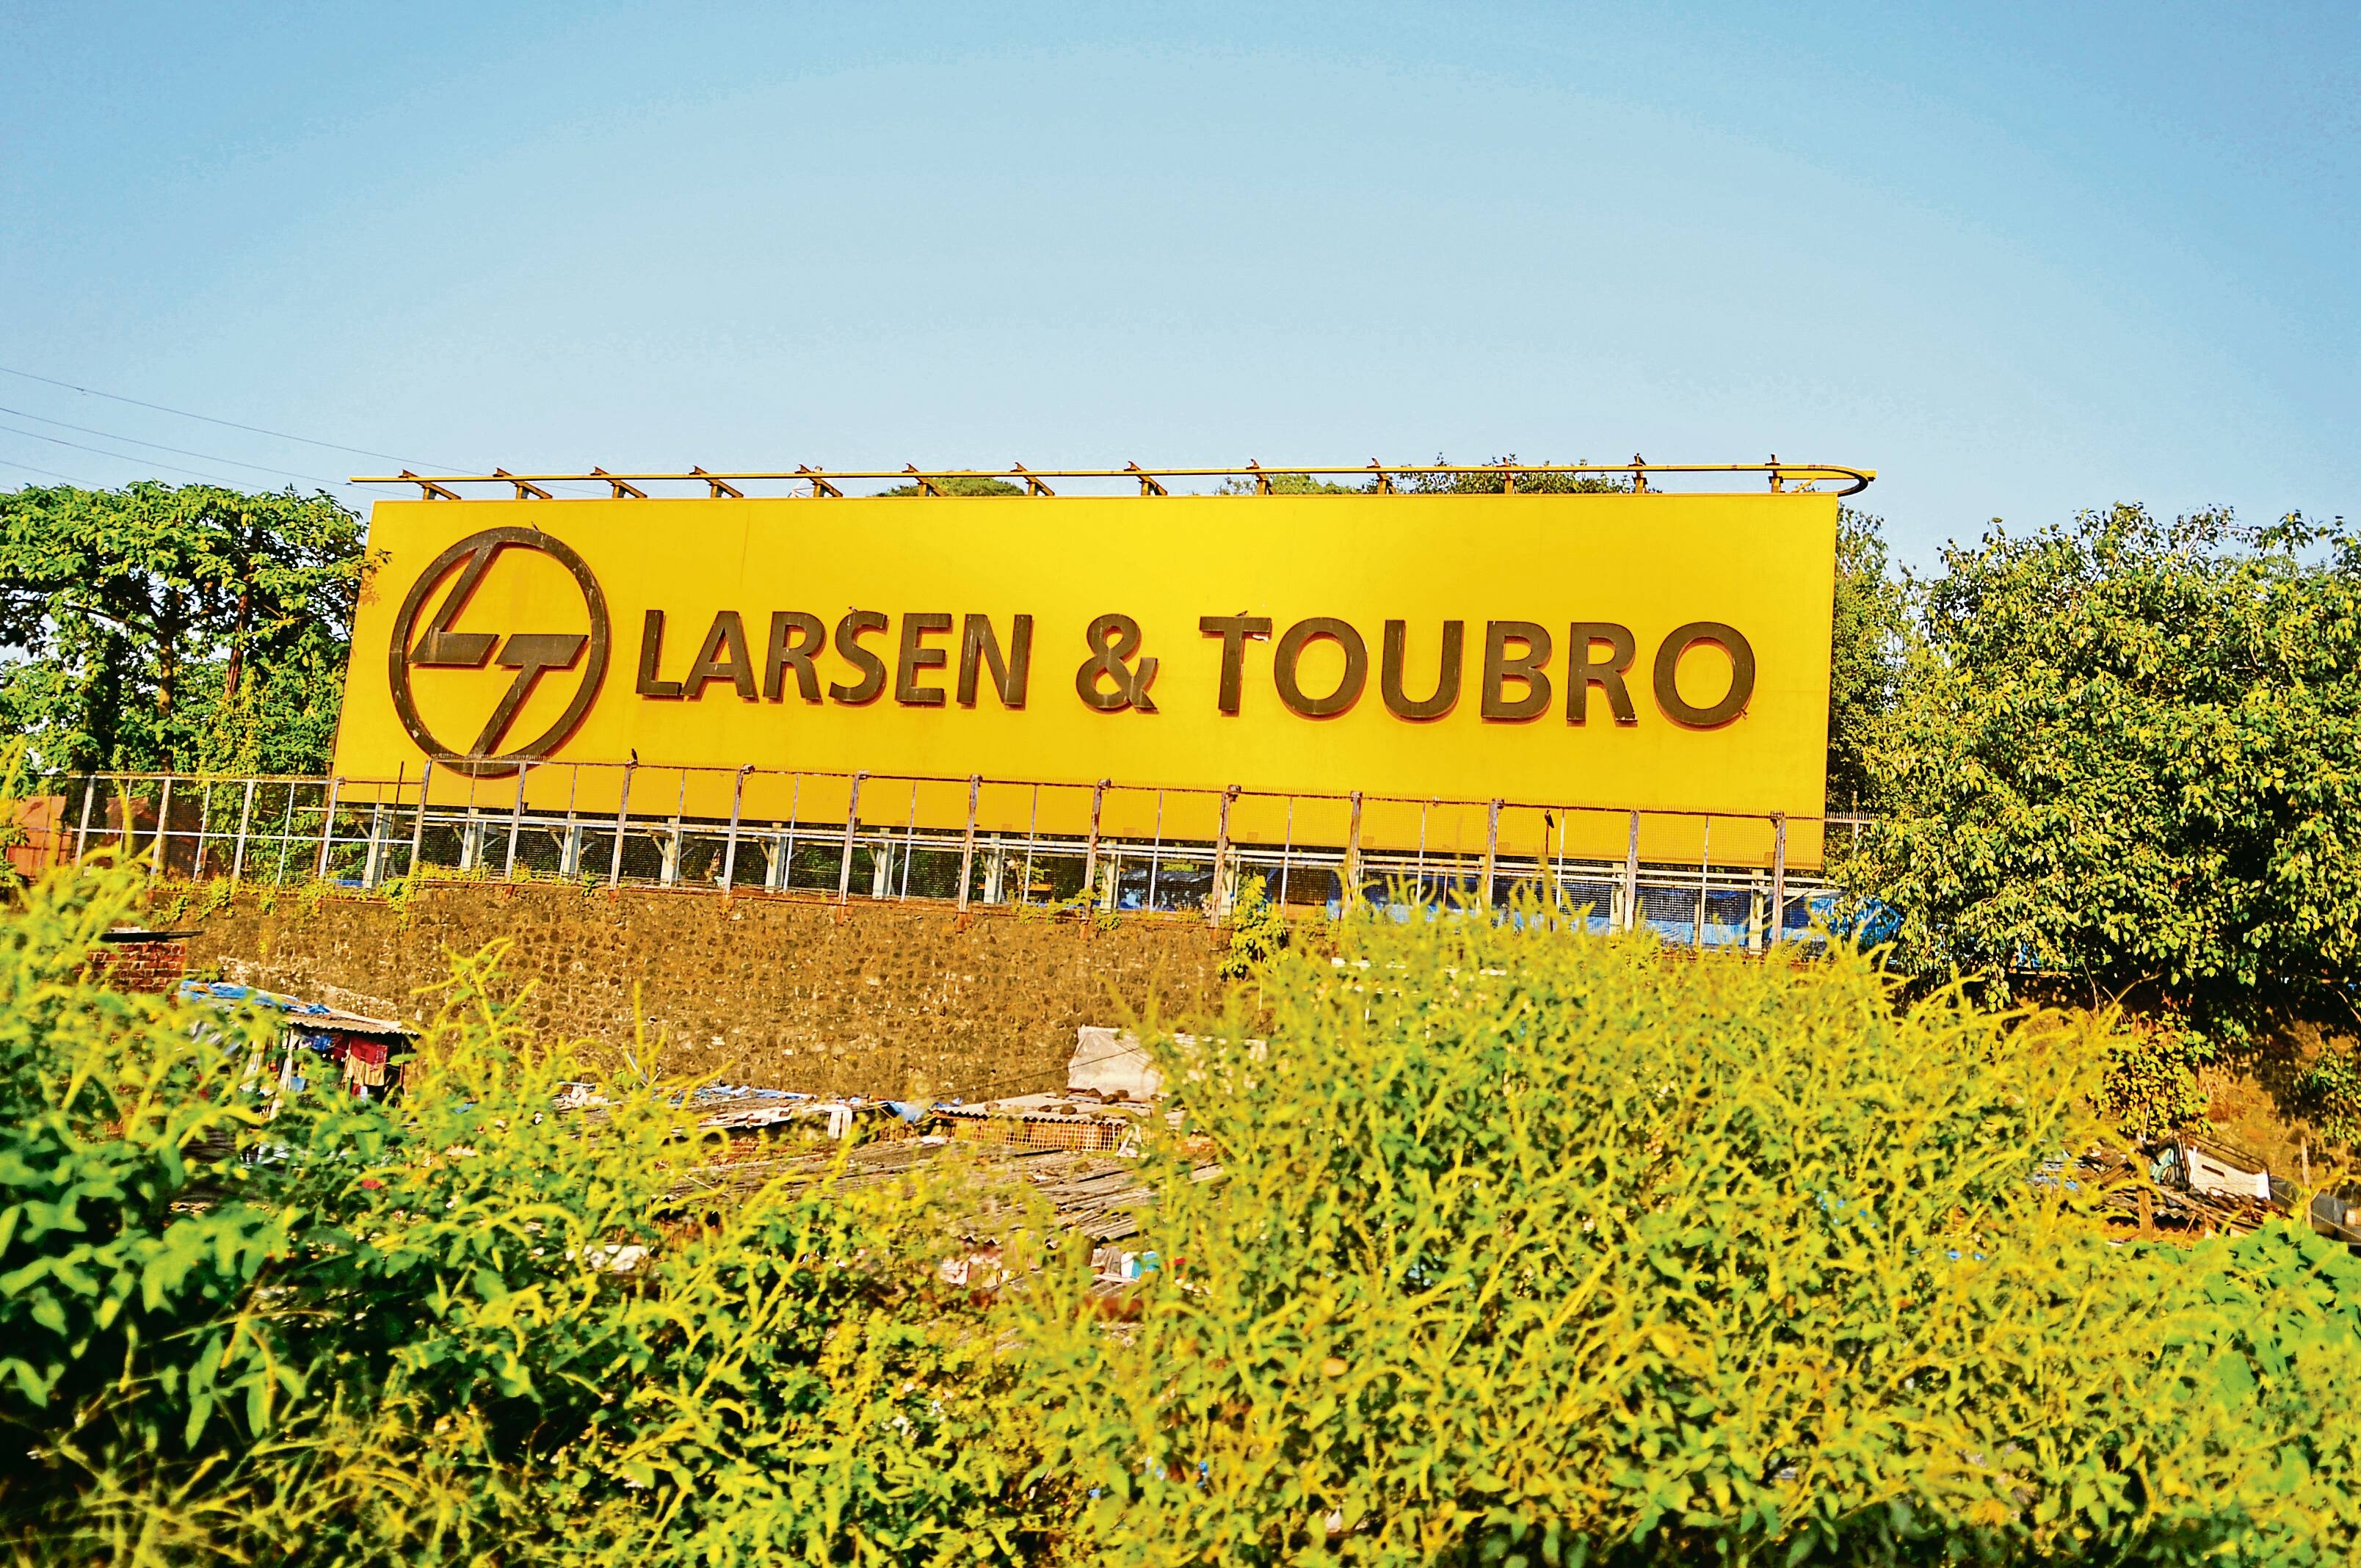 Larsen &amp; Toubro: The brokerage expects the stock to rise 15 percent in 12 months and has a target price of  <span class='webrupee'>₹</span>2,005 for the infra major from it CMP of  <span class='webrupee'>₹</span>1,743 as on March 15. It has lost 16 percent from its 52-week high of  <span class='webrupee'>₹</span>2,078, hit on January 18, 2022. The stock shed 5 percent in Feb and another 3.5 percent in March till now, however, it has added 17 percent in the last 1 year despite weak trends.